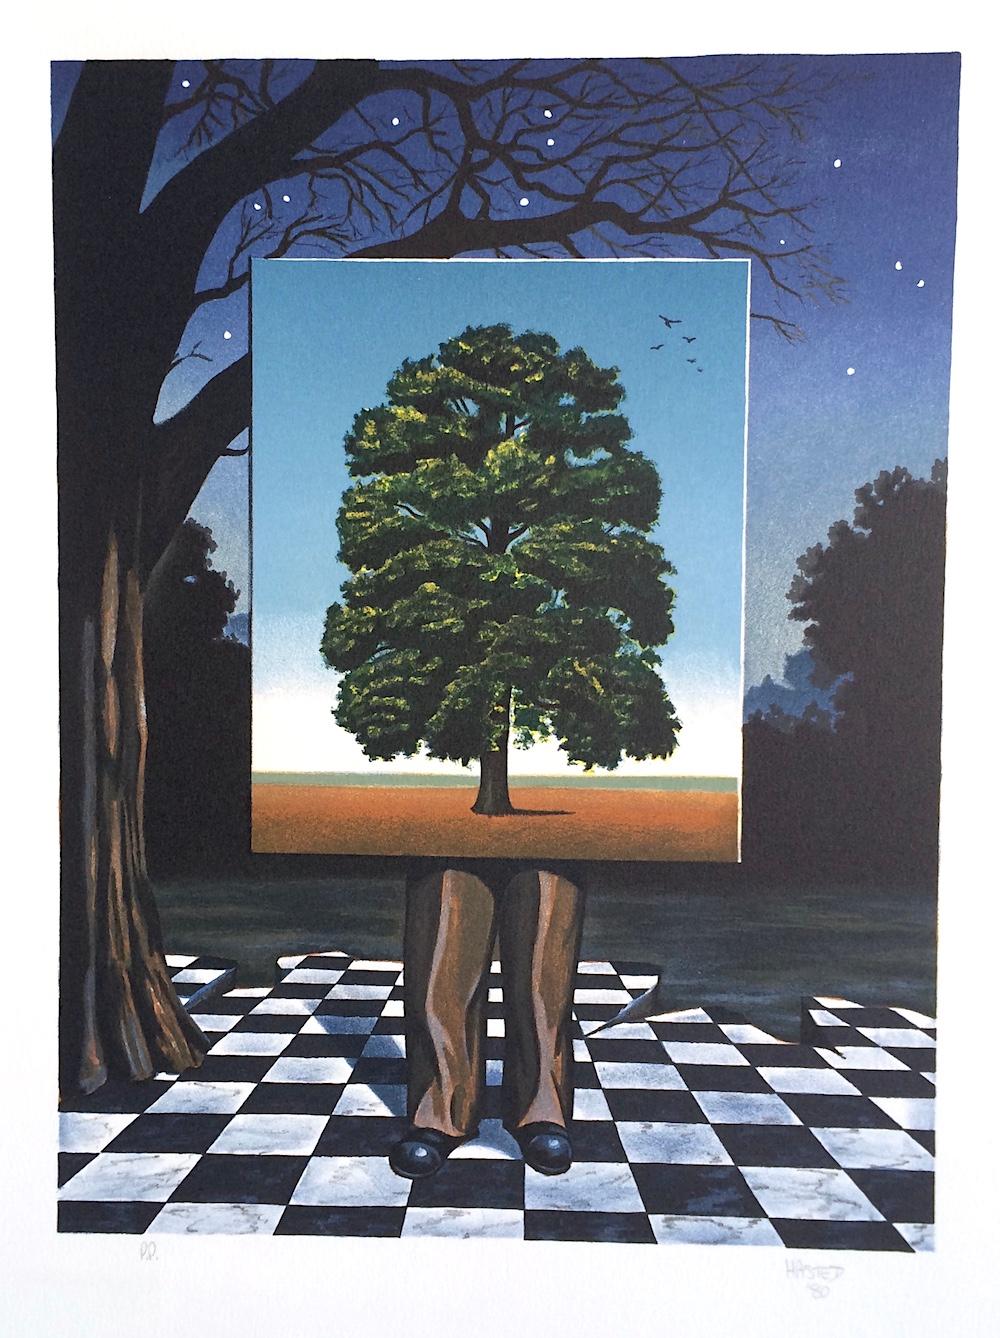 Michael Hasted Portrait Print -  PUBLIC OUTCRY Signed Lithograph, Surrealist Scene Man, Tree, Checkered Tiles